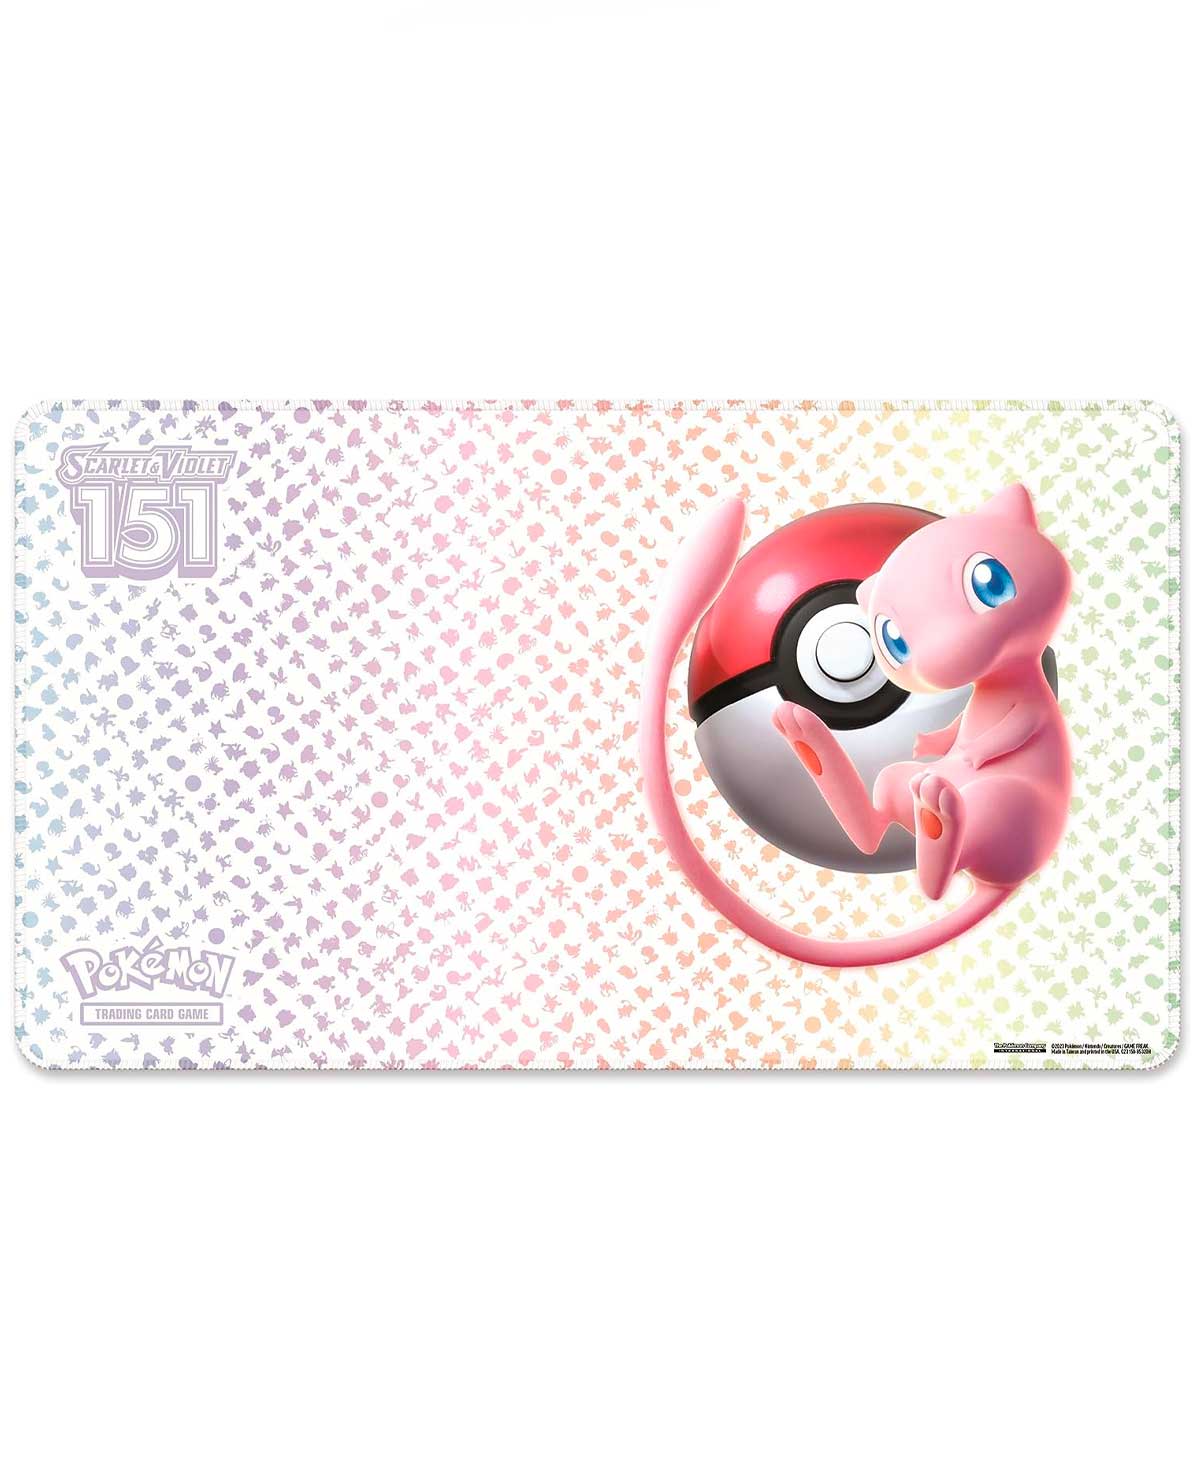 POKEMON TRADING CARD GAME SCARLET AND VIOLET 151 ULTRA PREMIUM COLLECTION